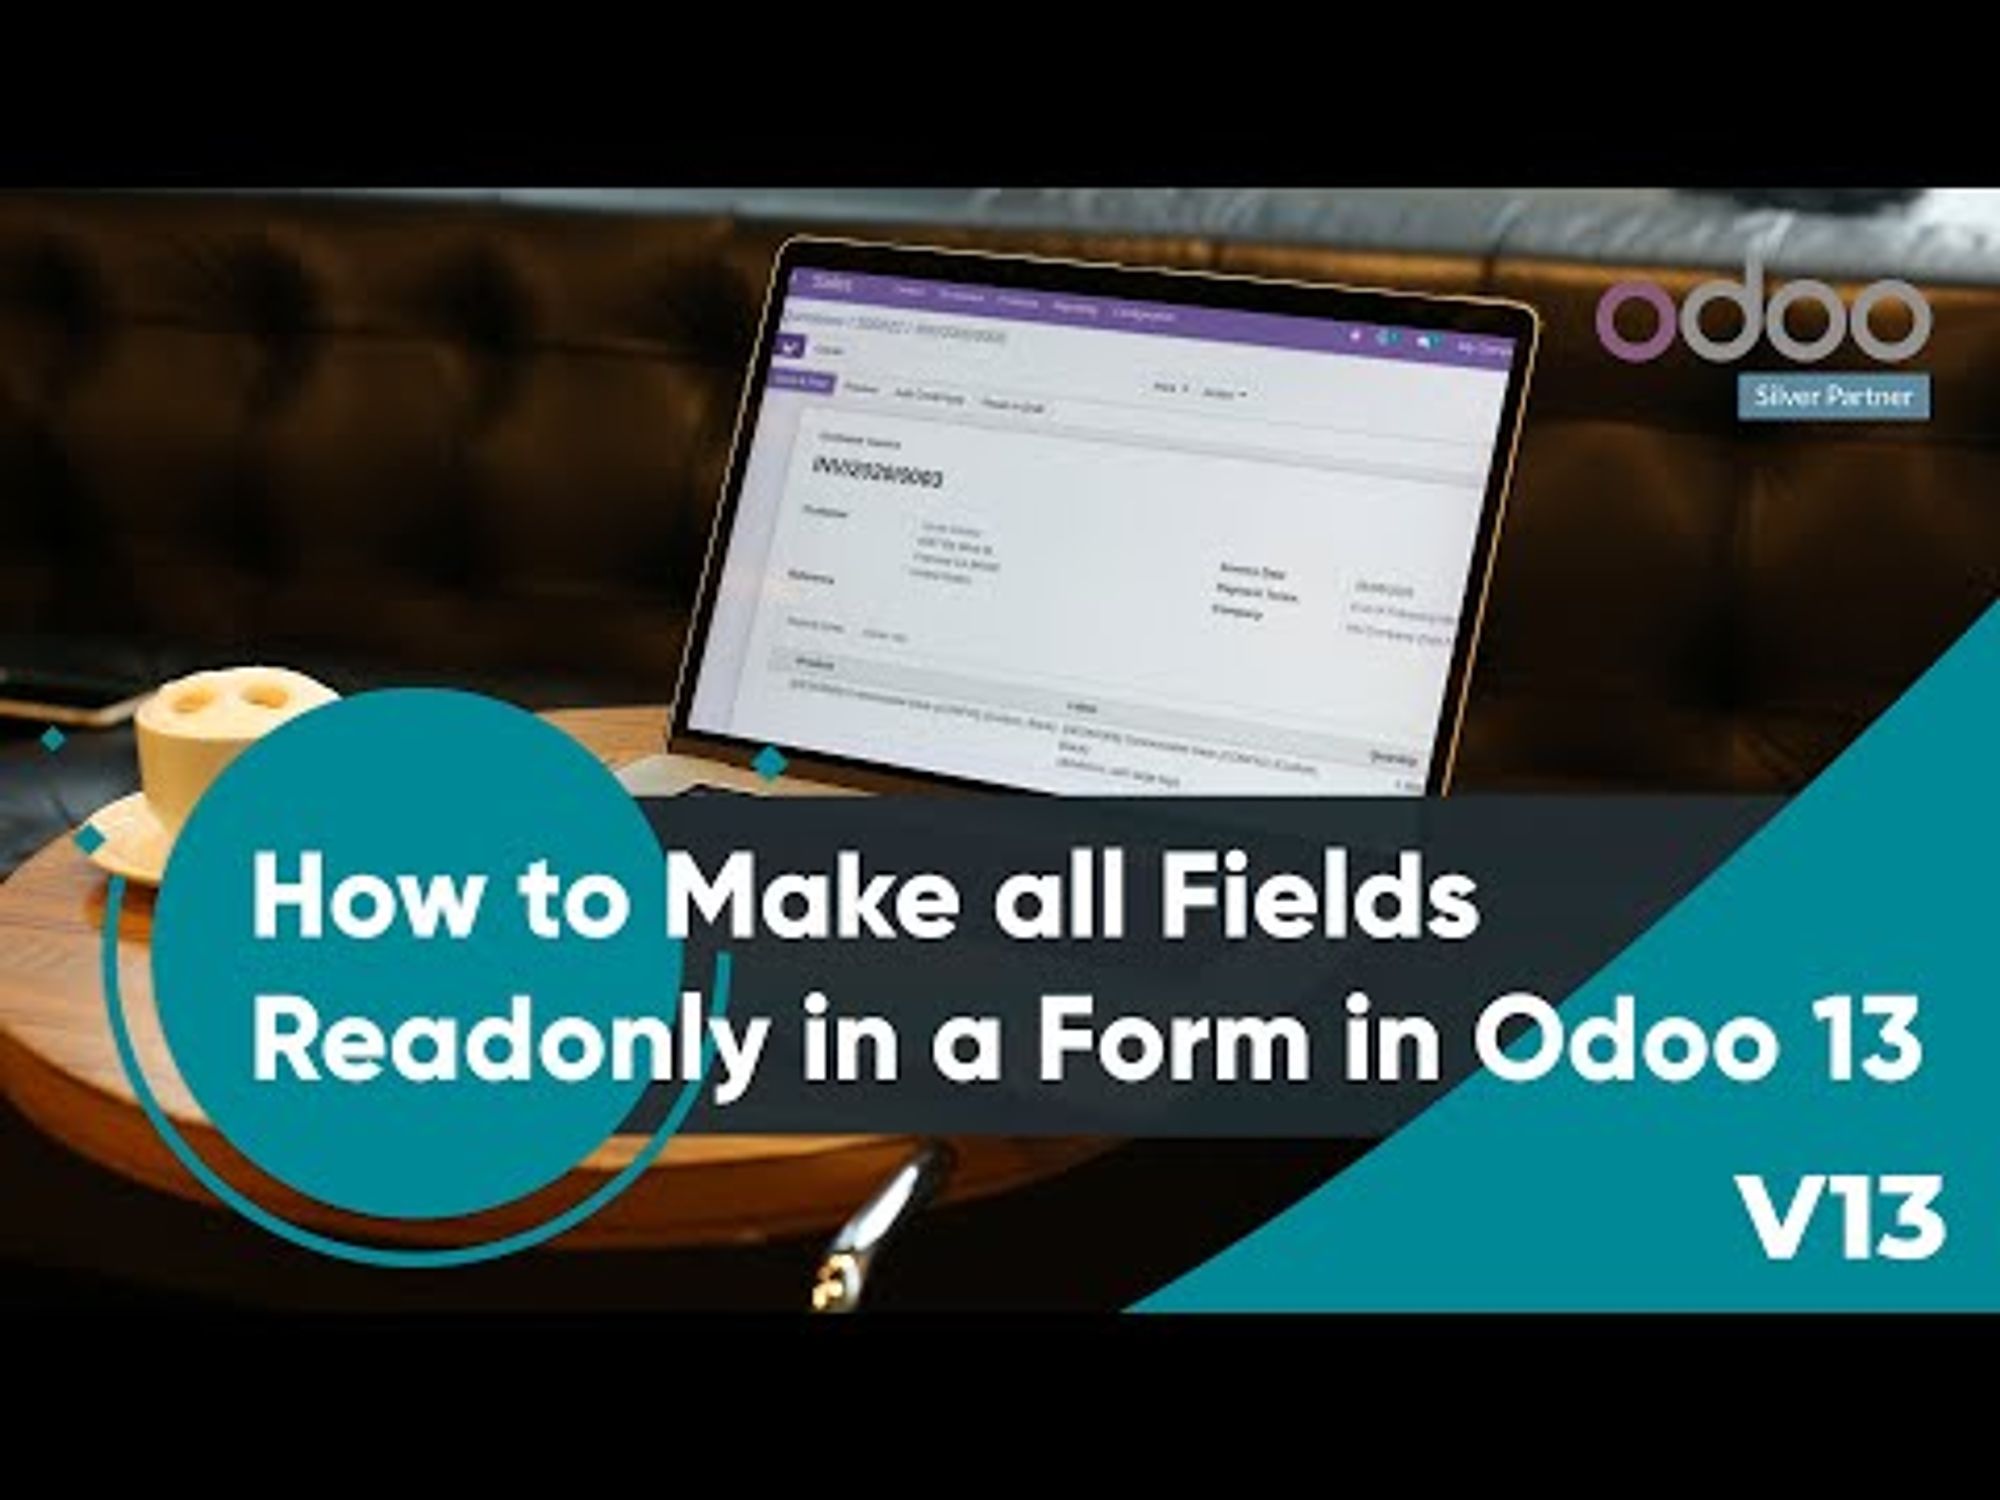 How to make all fields read-only in a form in Odoo 13?